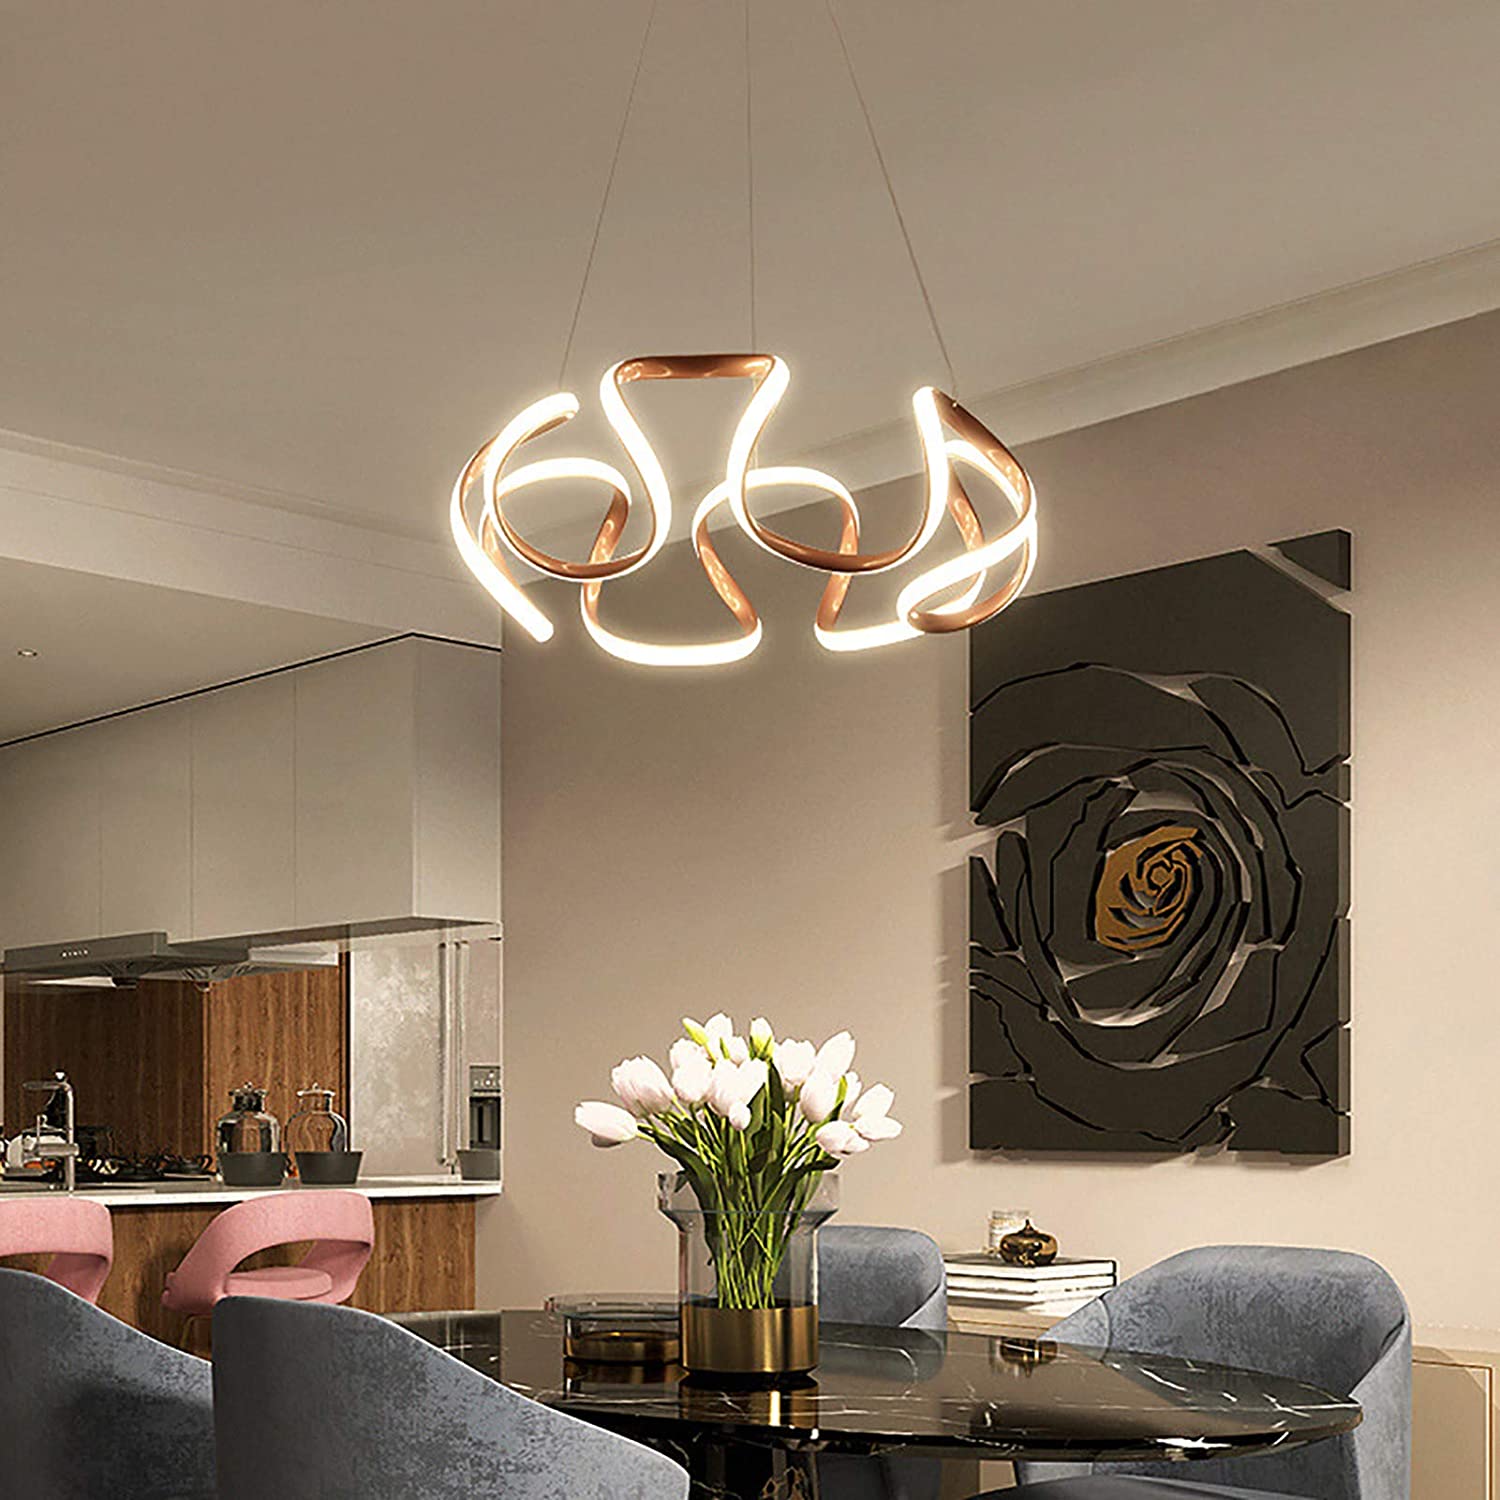 MONIPA LED Ceiling Light Fixture Modern Champagne Gold Pendant Light Stepless Dimming with Remote Control for Living Room Dining Kitchen Bar Table Lamp - image 1 of 7